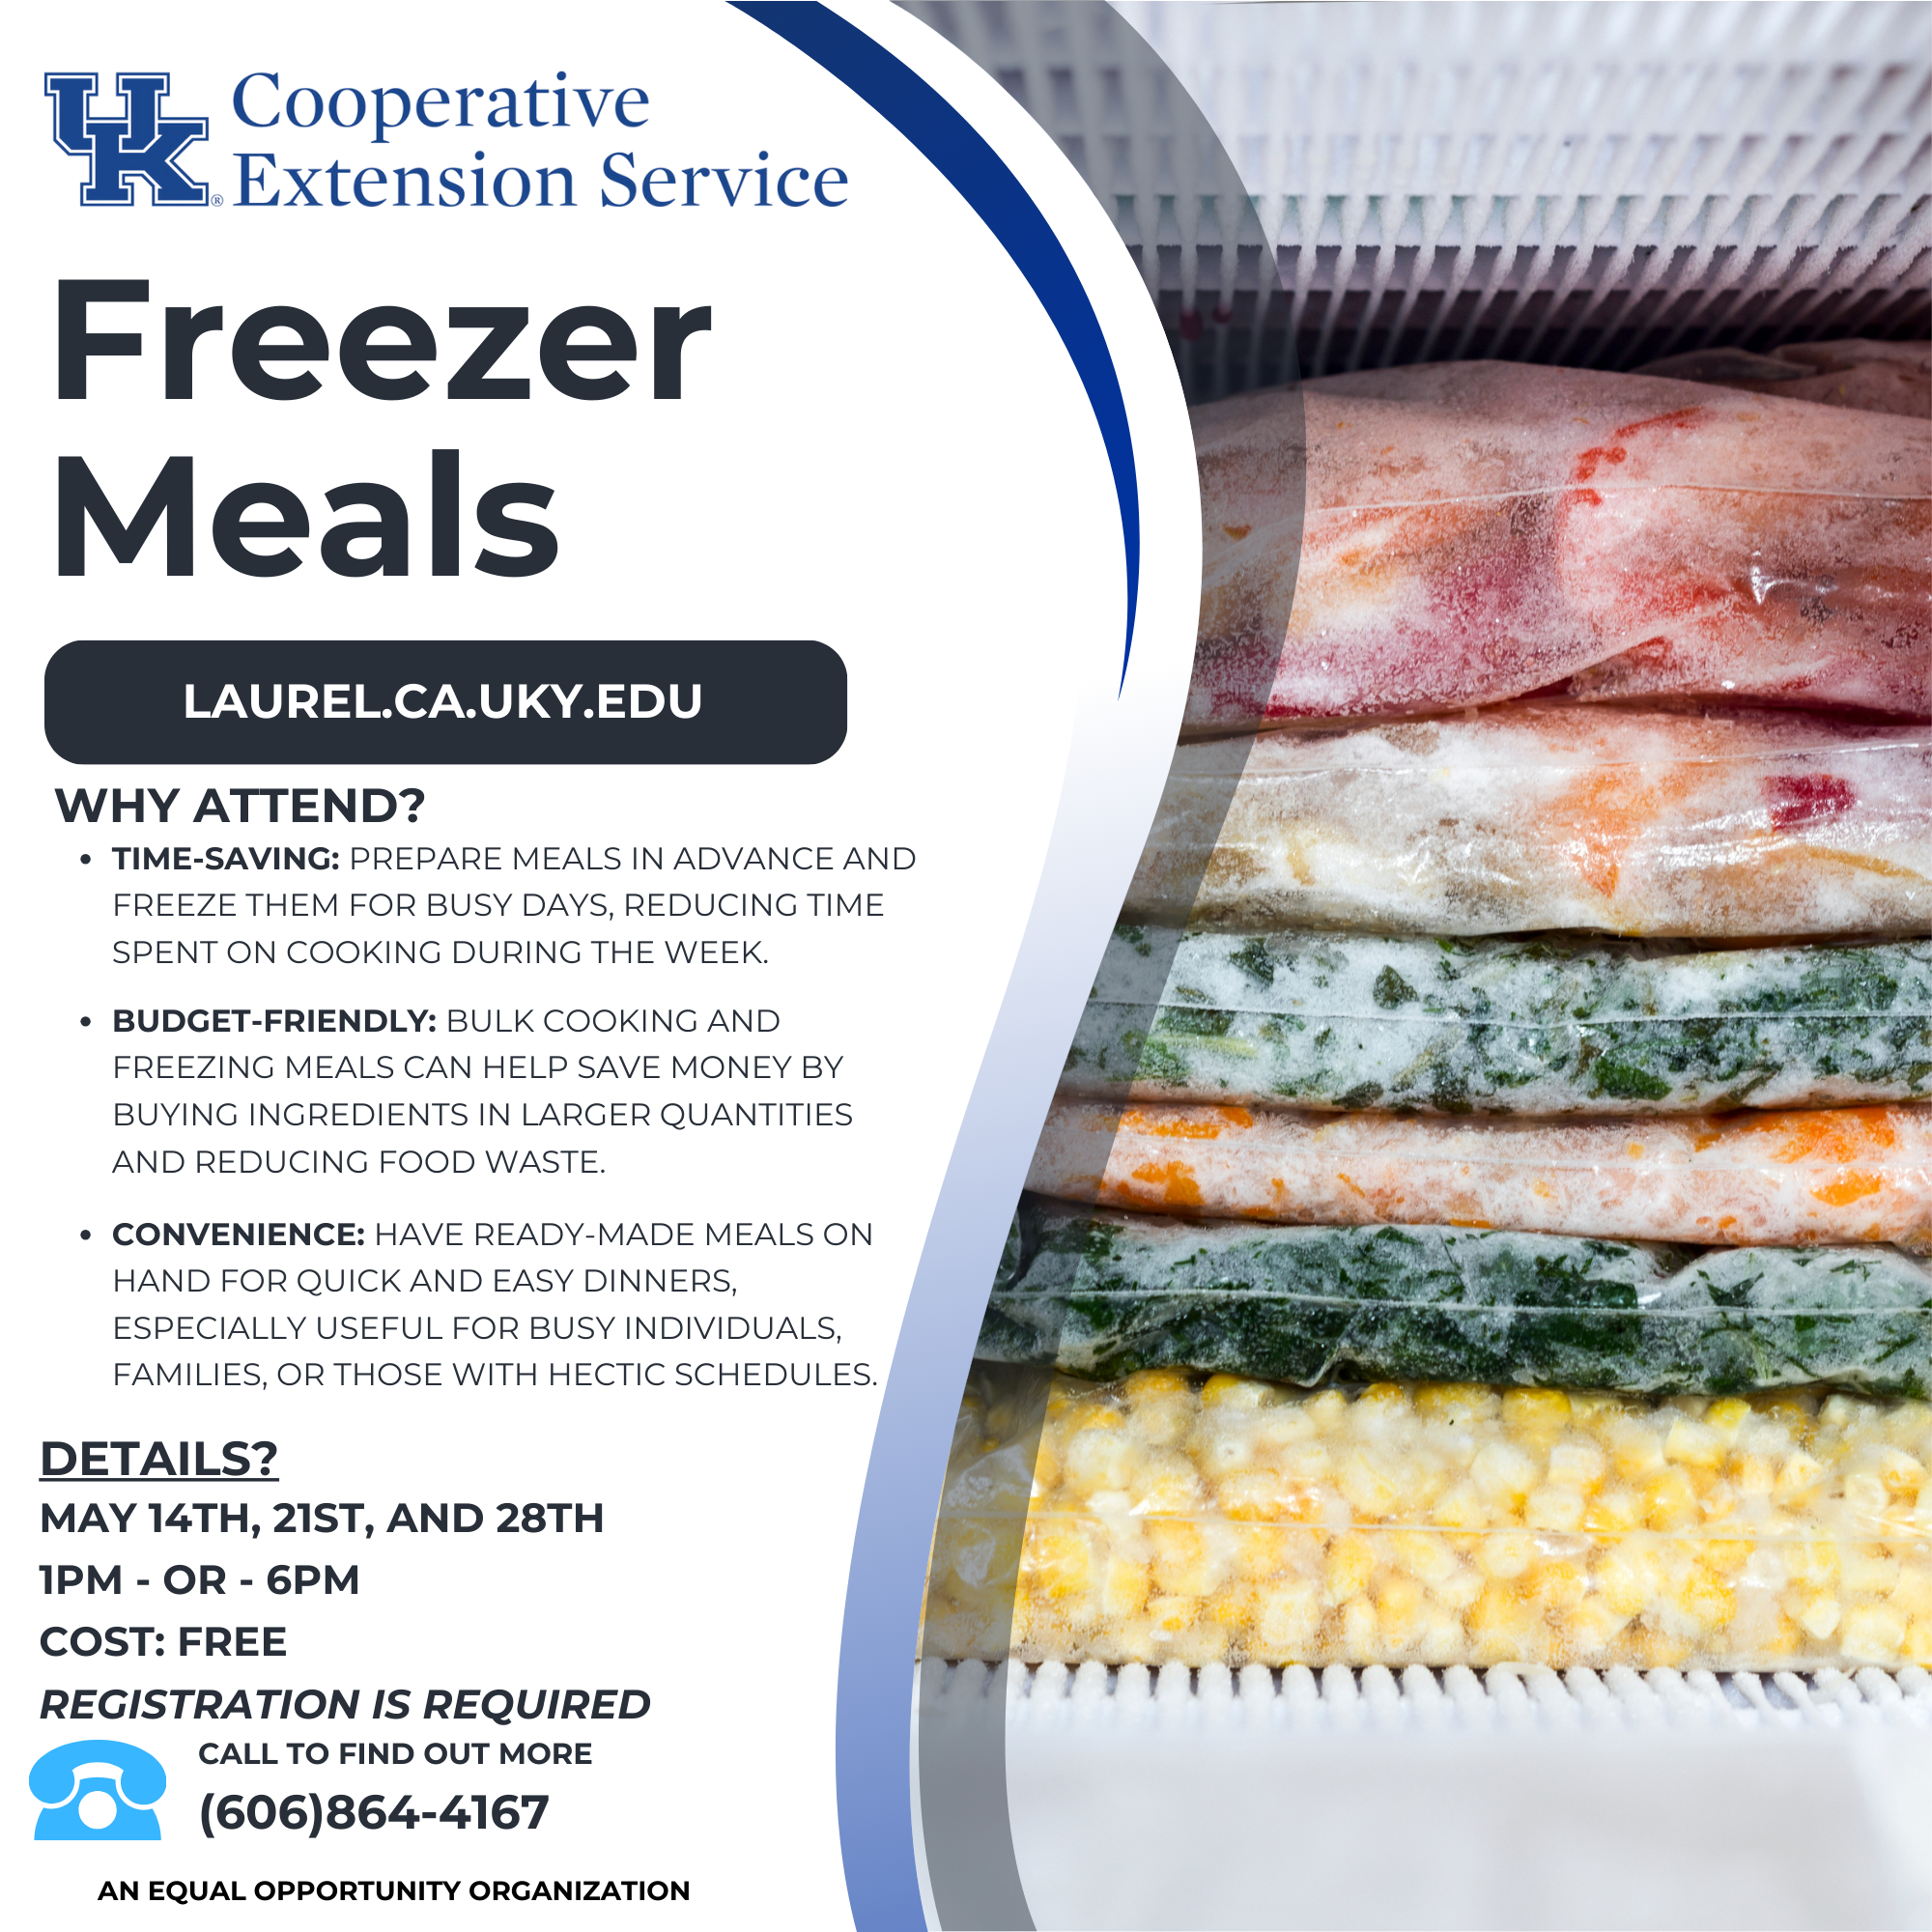 Flyer with background containing bags of frozen vegetables and includes class date details.